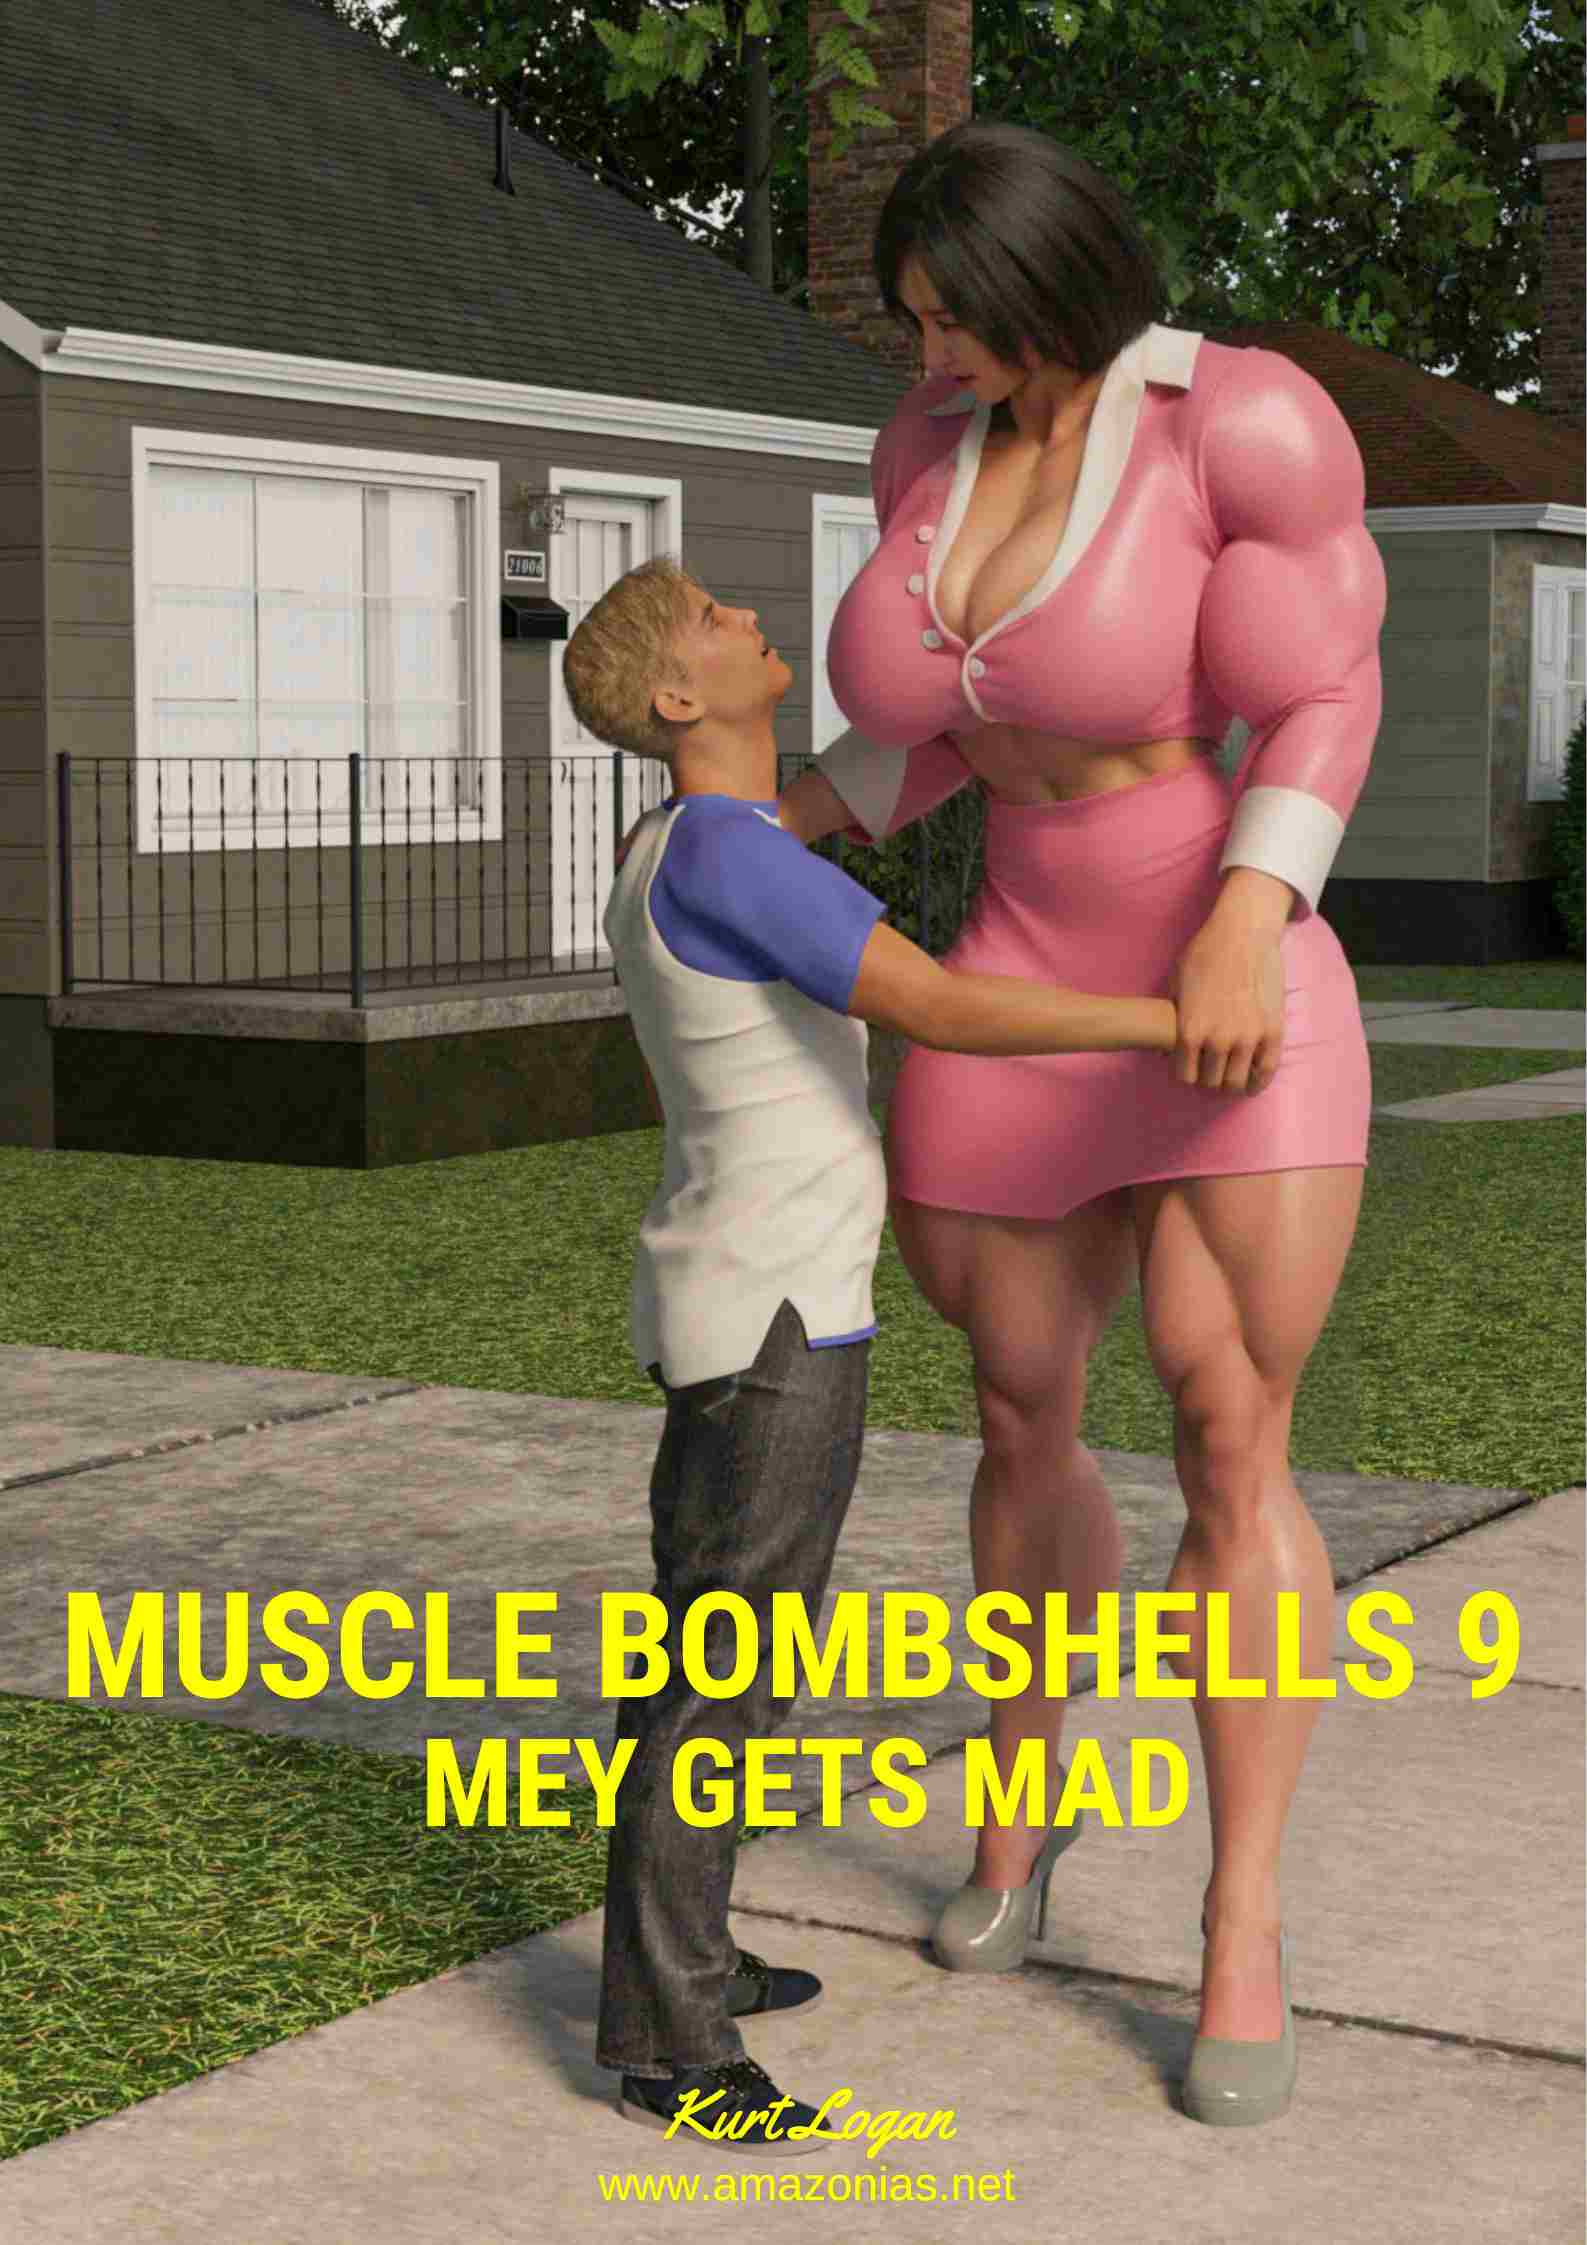 Muscle Bombshells 9: Mey gets mad